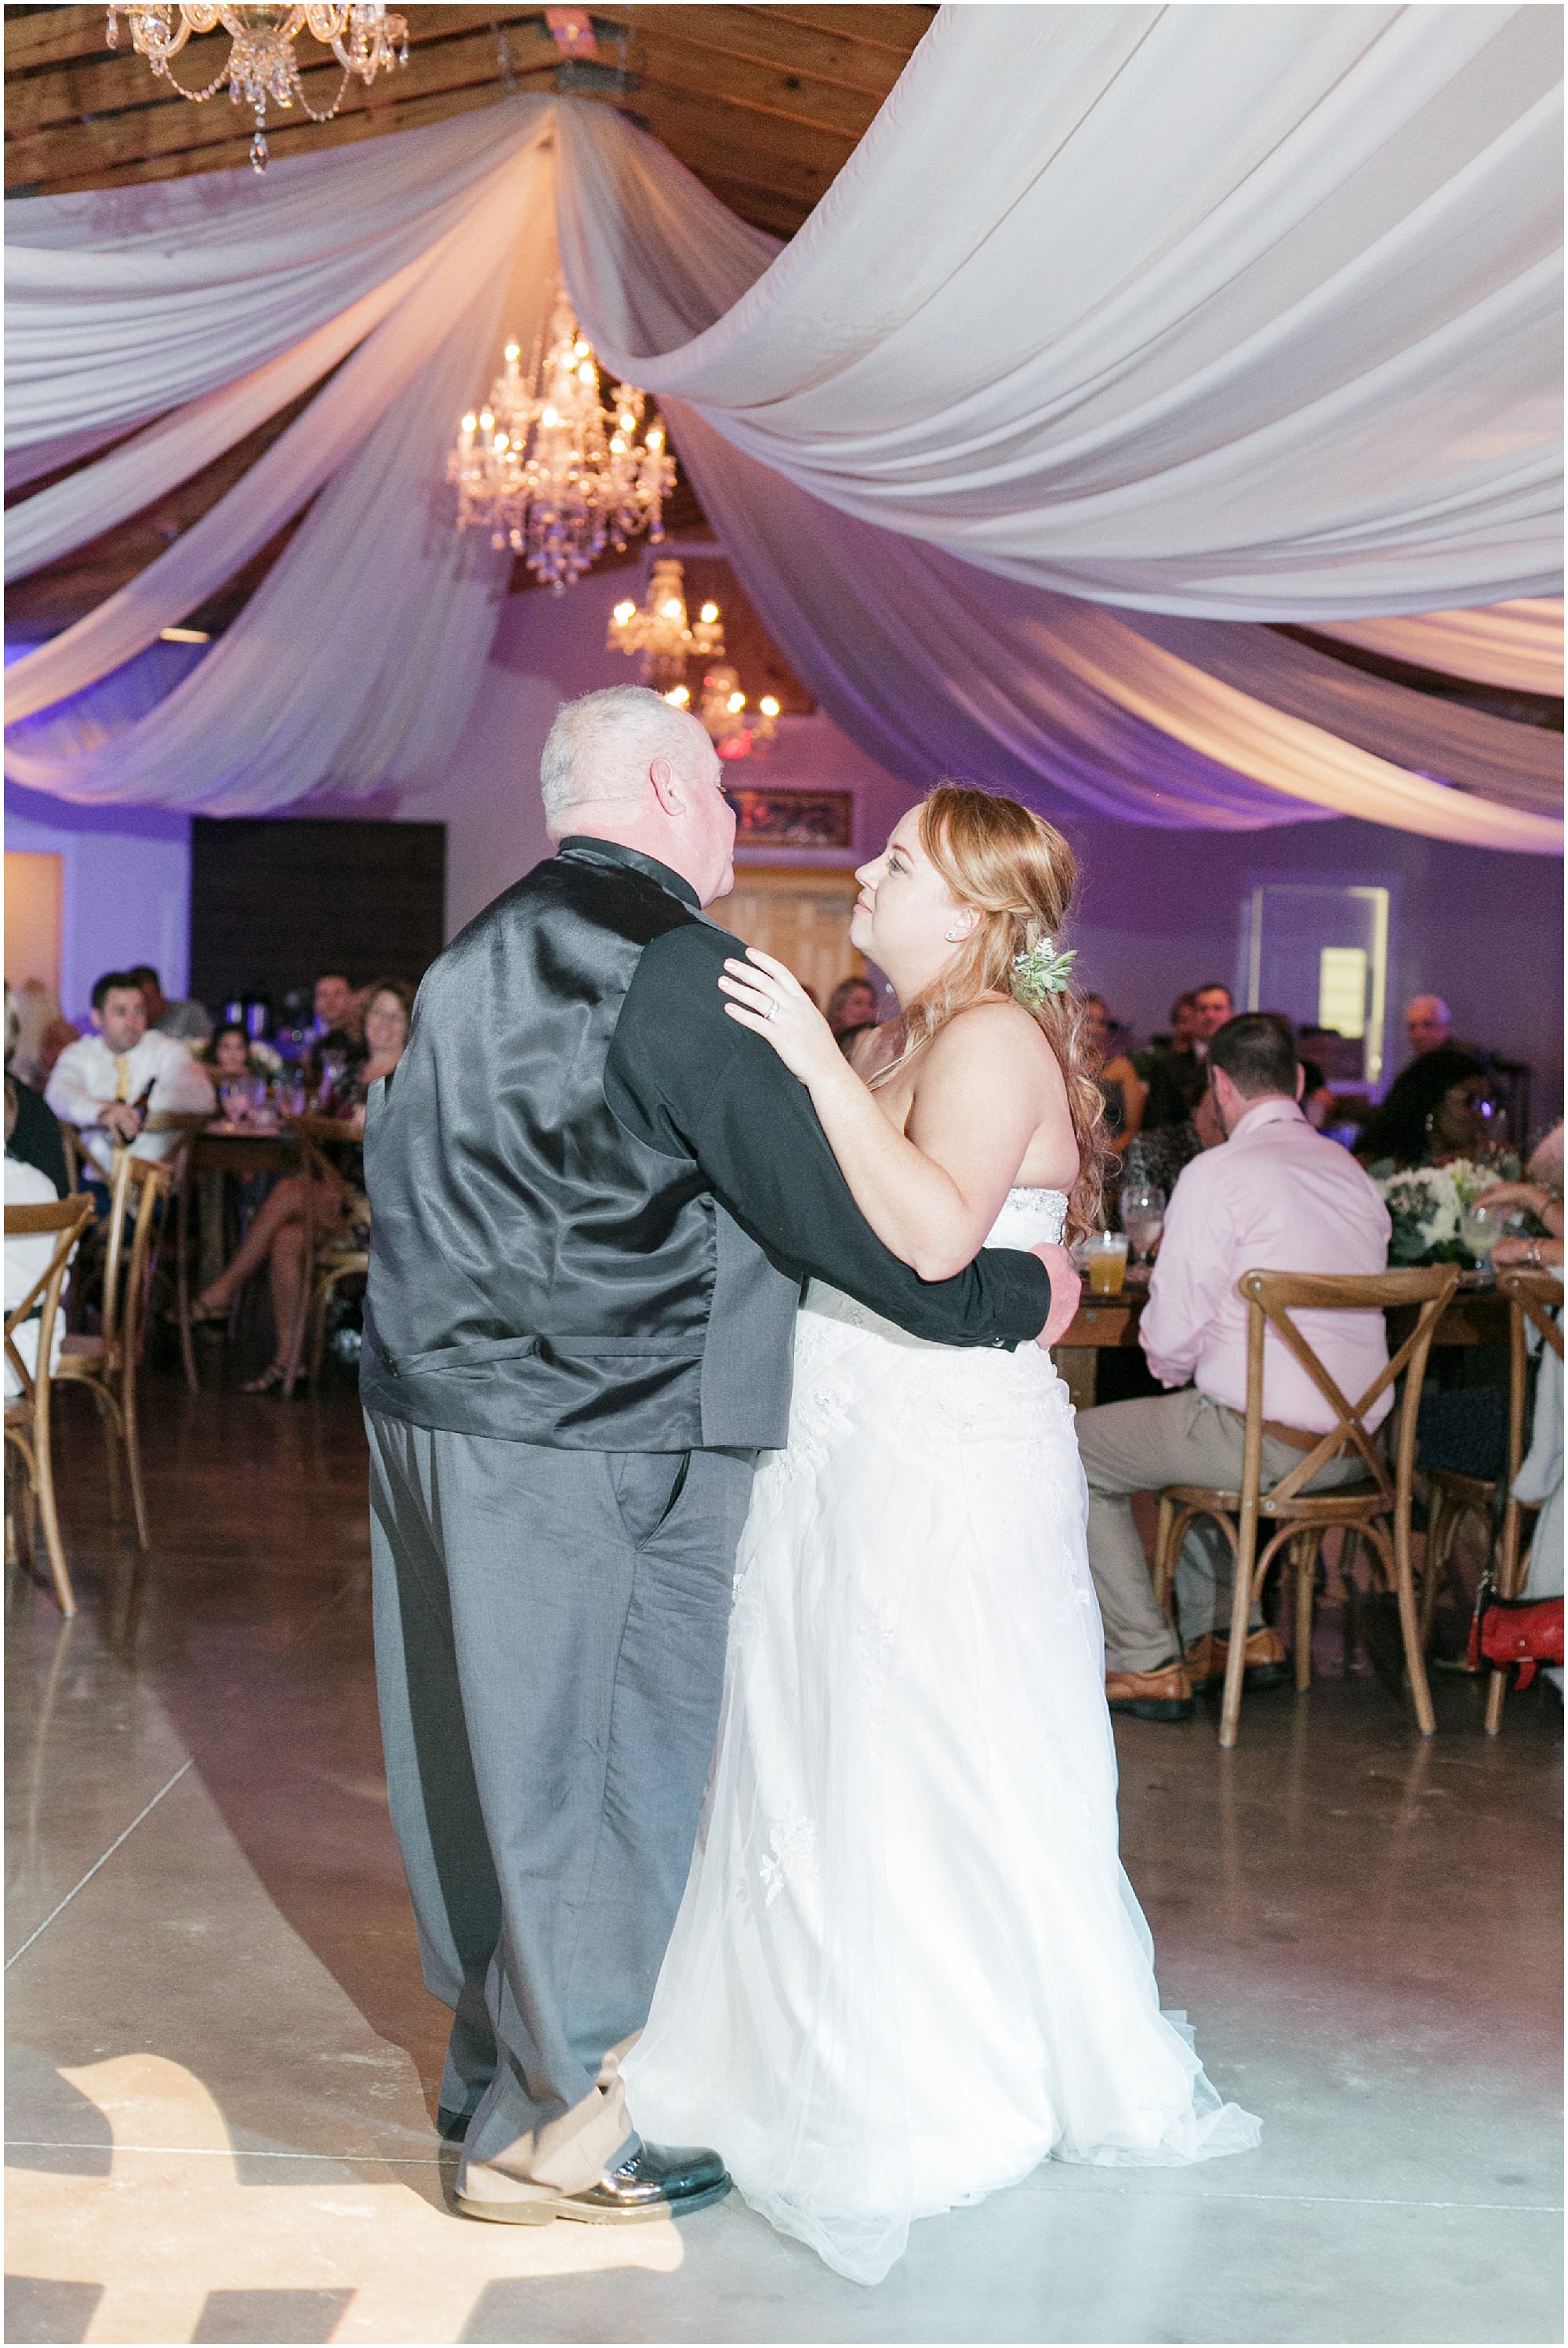 The bride dancing with her father. 